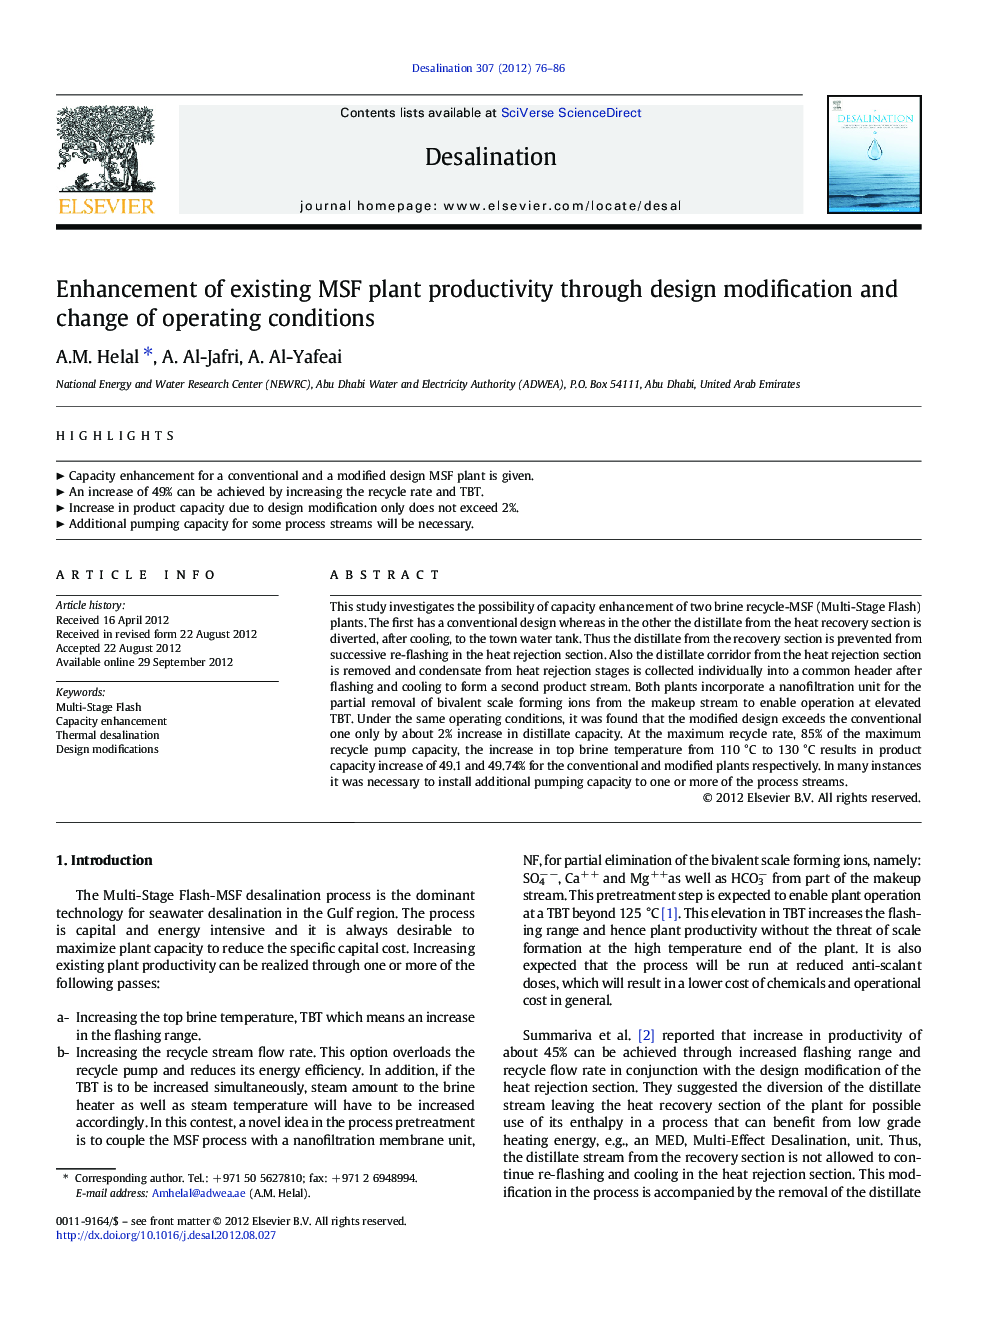 Enhancement of existing MSF plant productivity through design modification and change of operating conditions